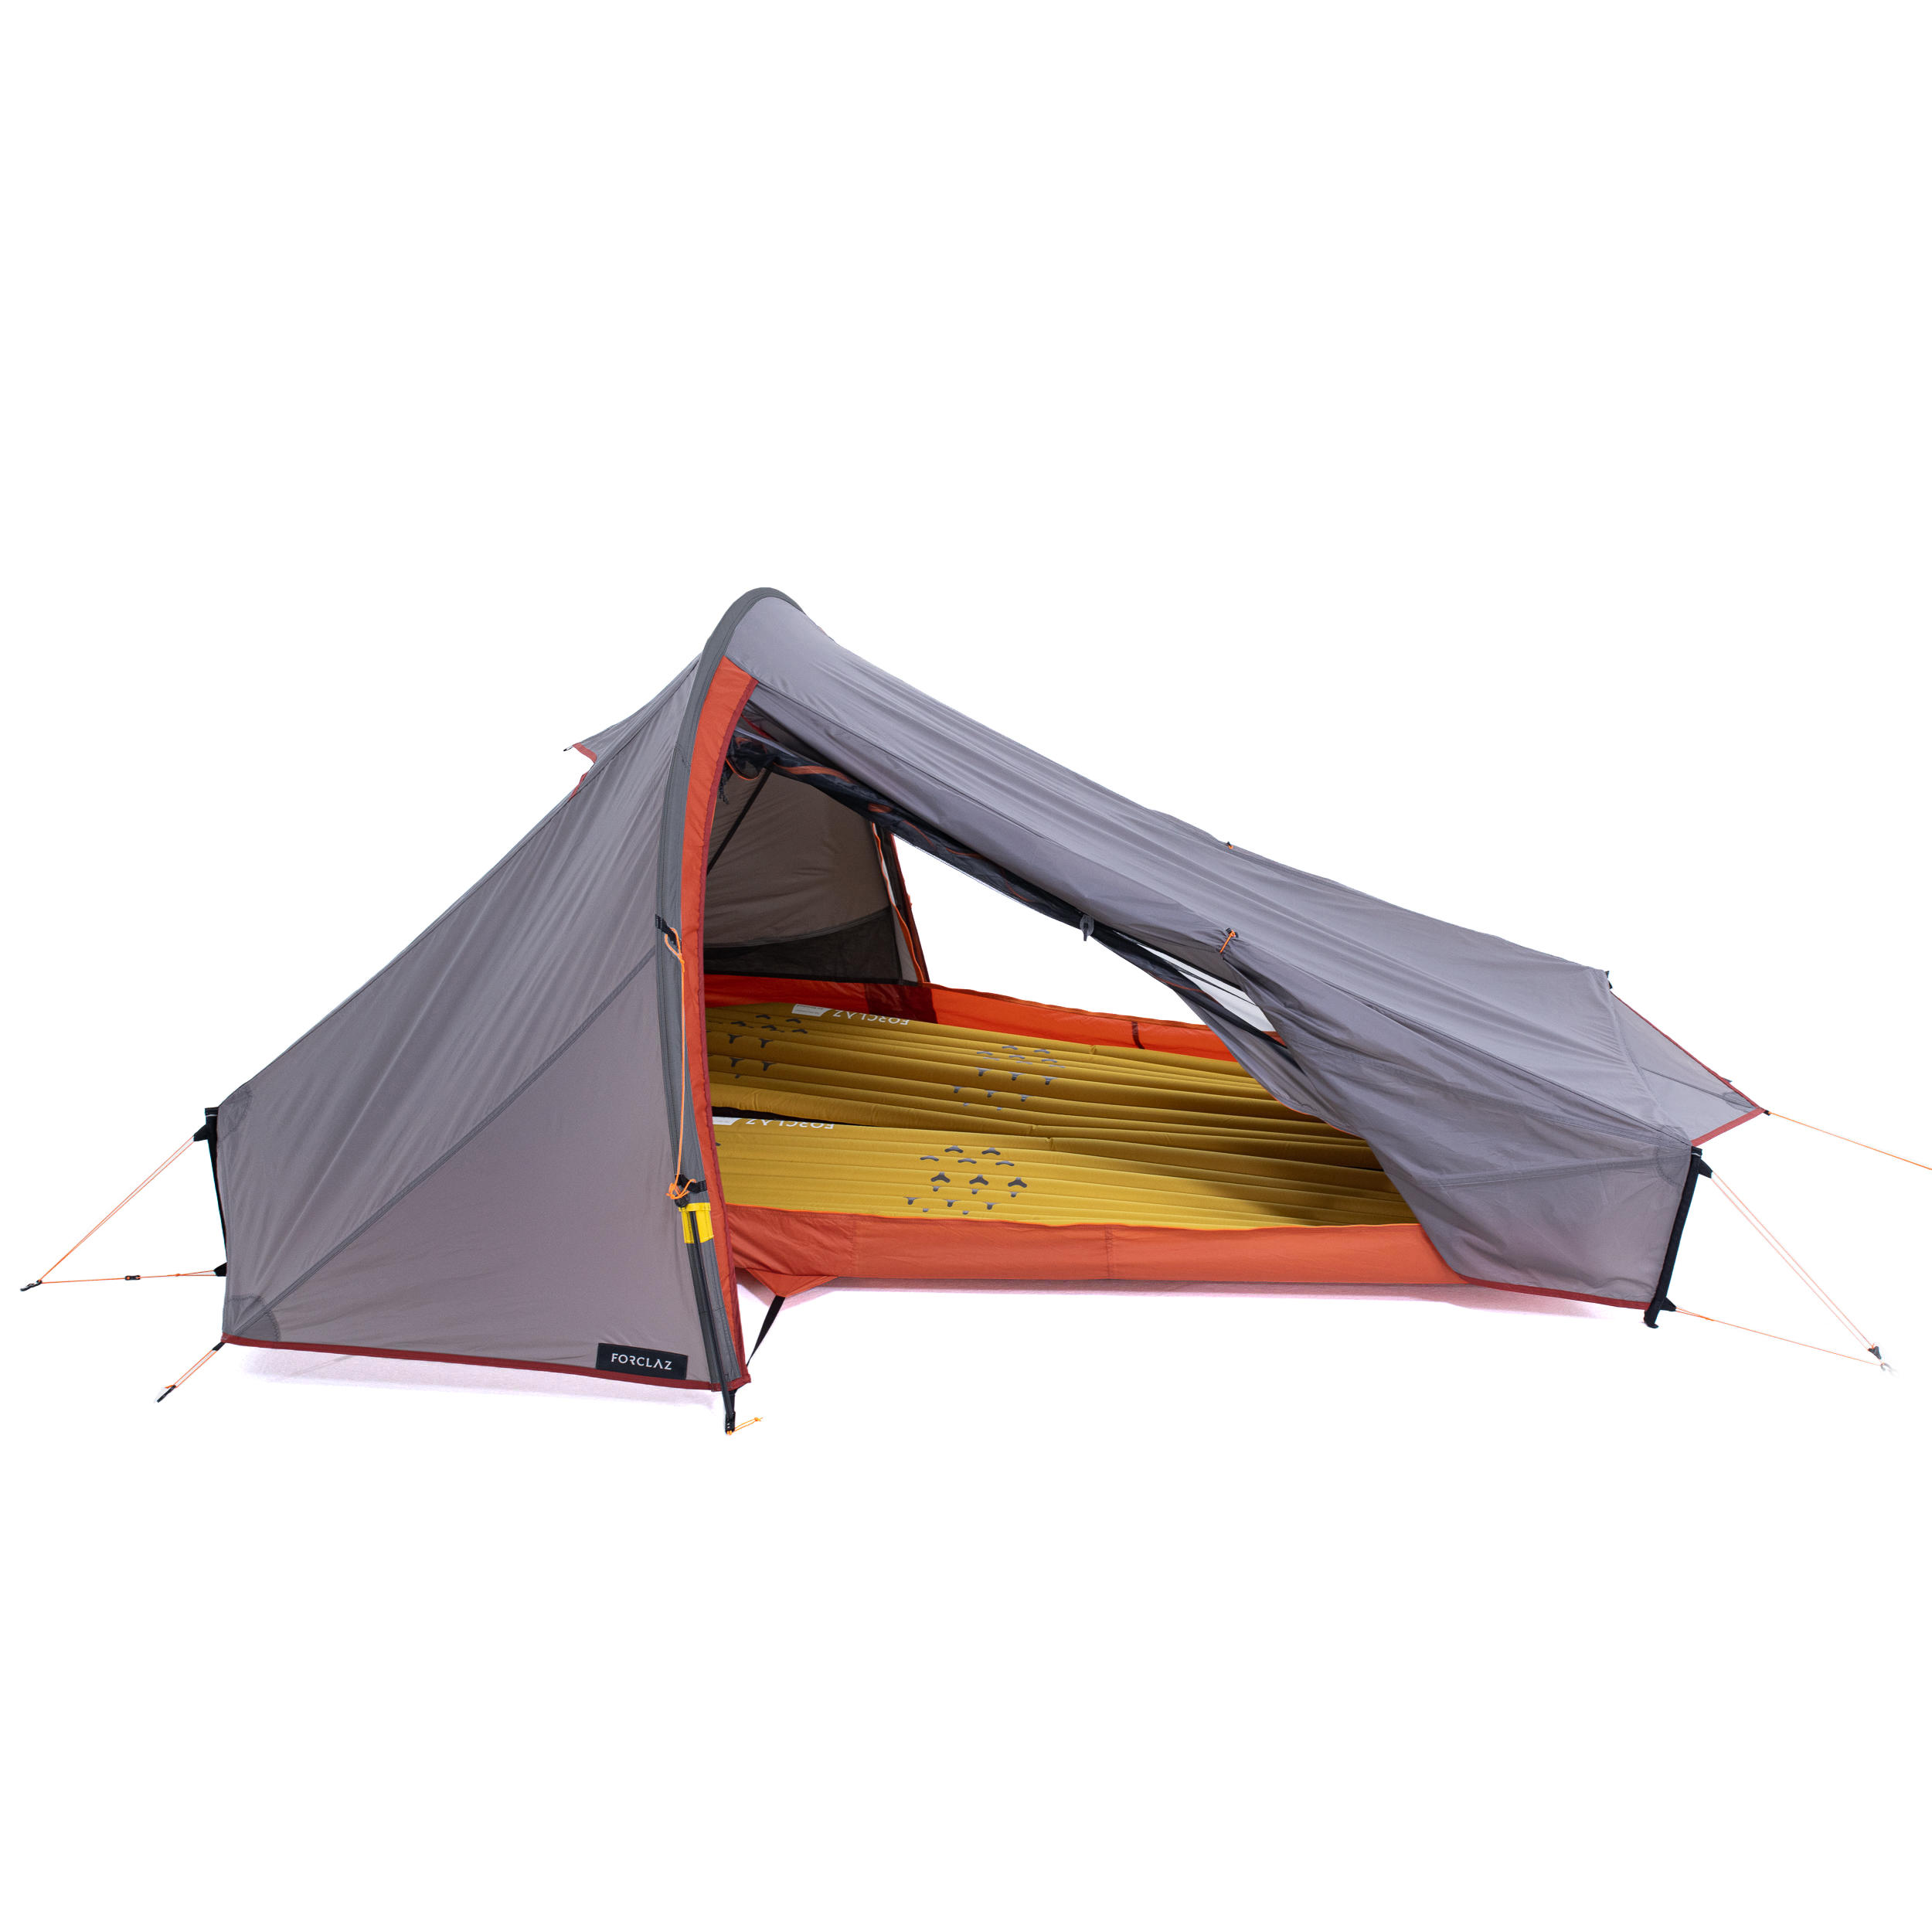 decathlon backpacking tent